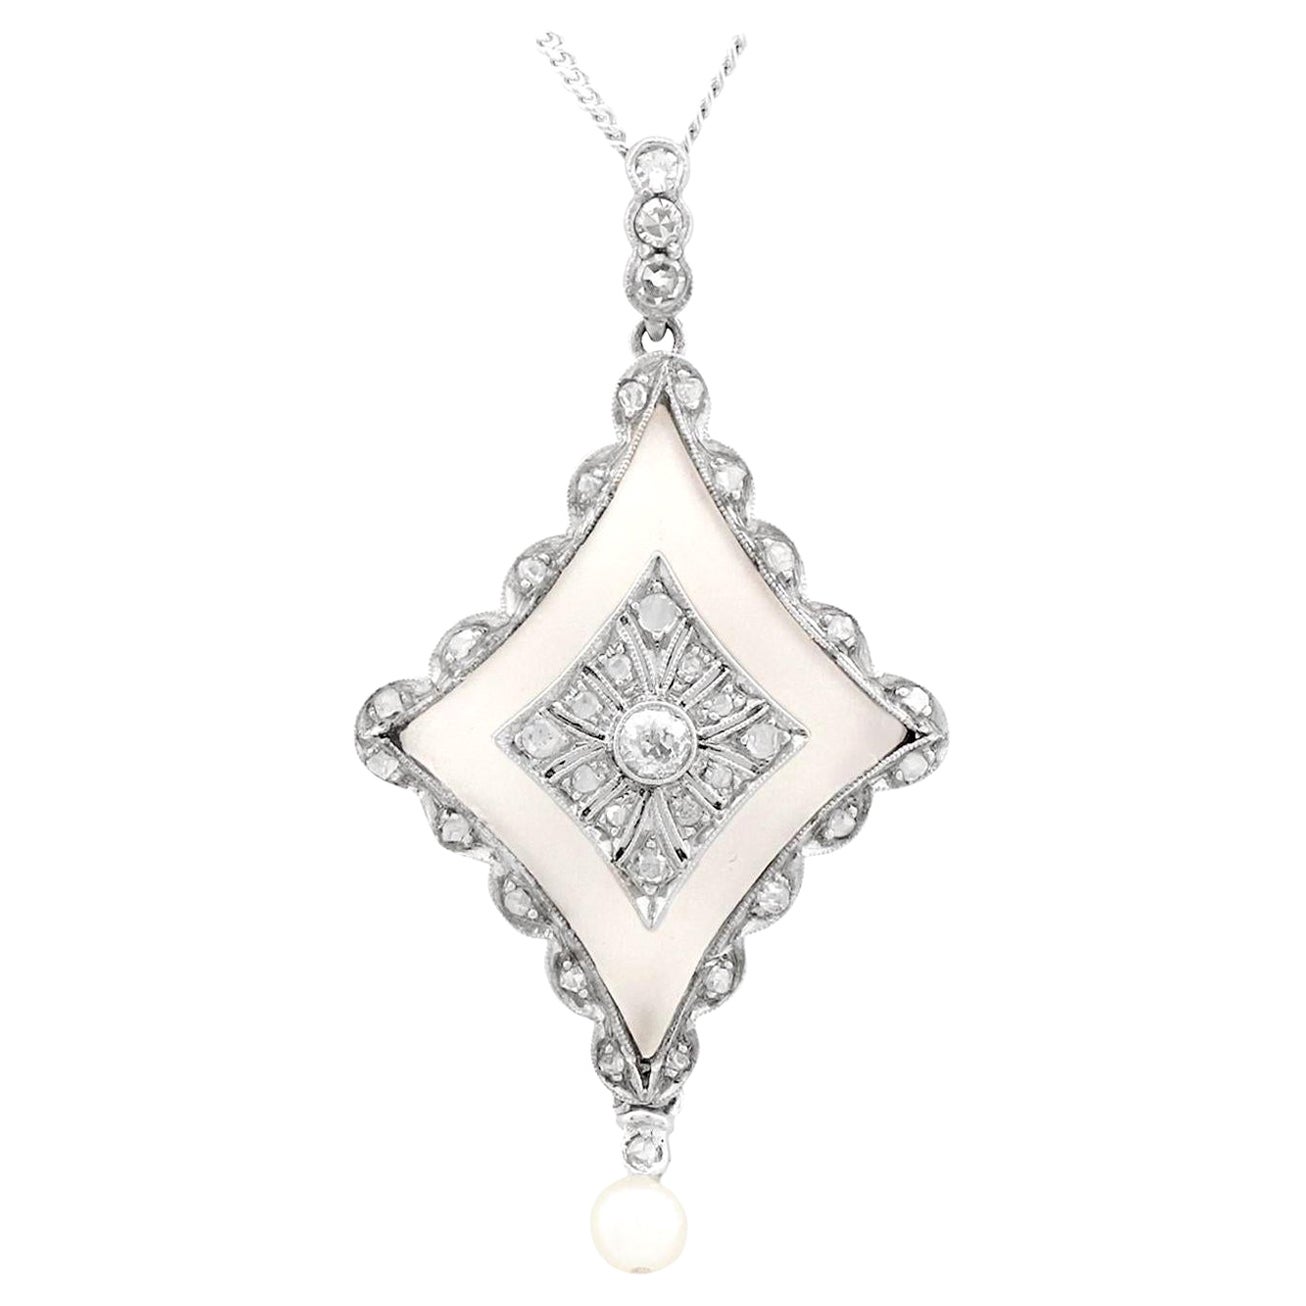 Antique Diamond and Pearl Rock Crystal and White Gold Pendant, circa 1910